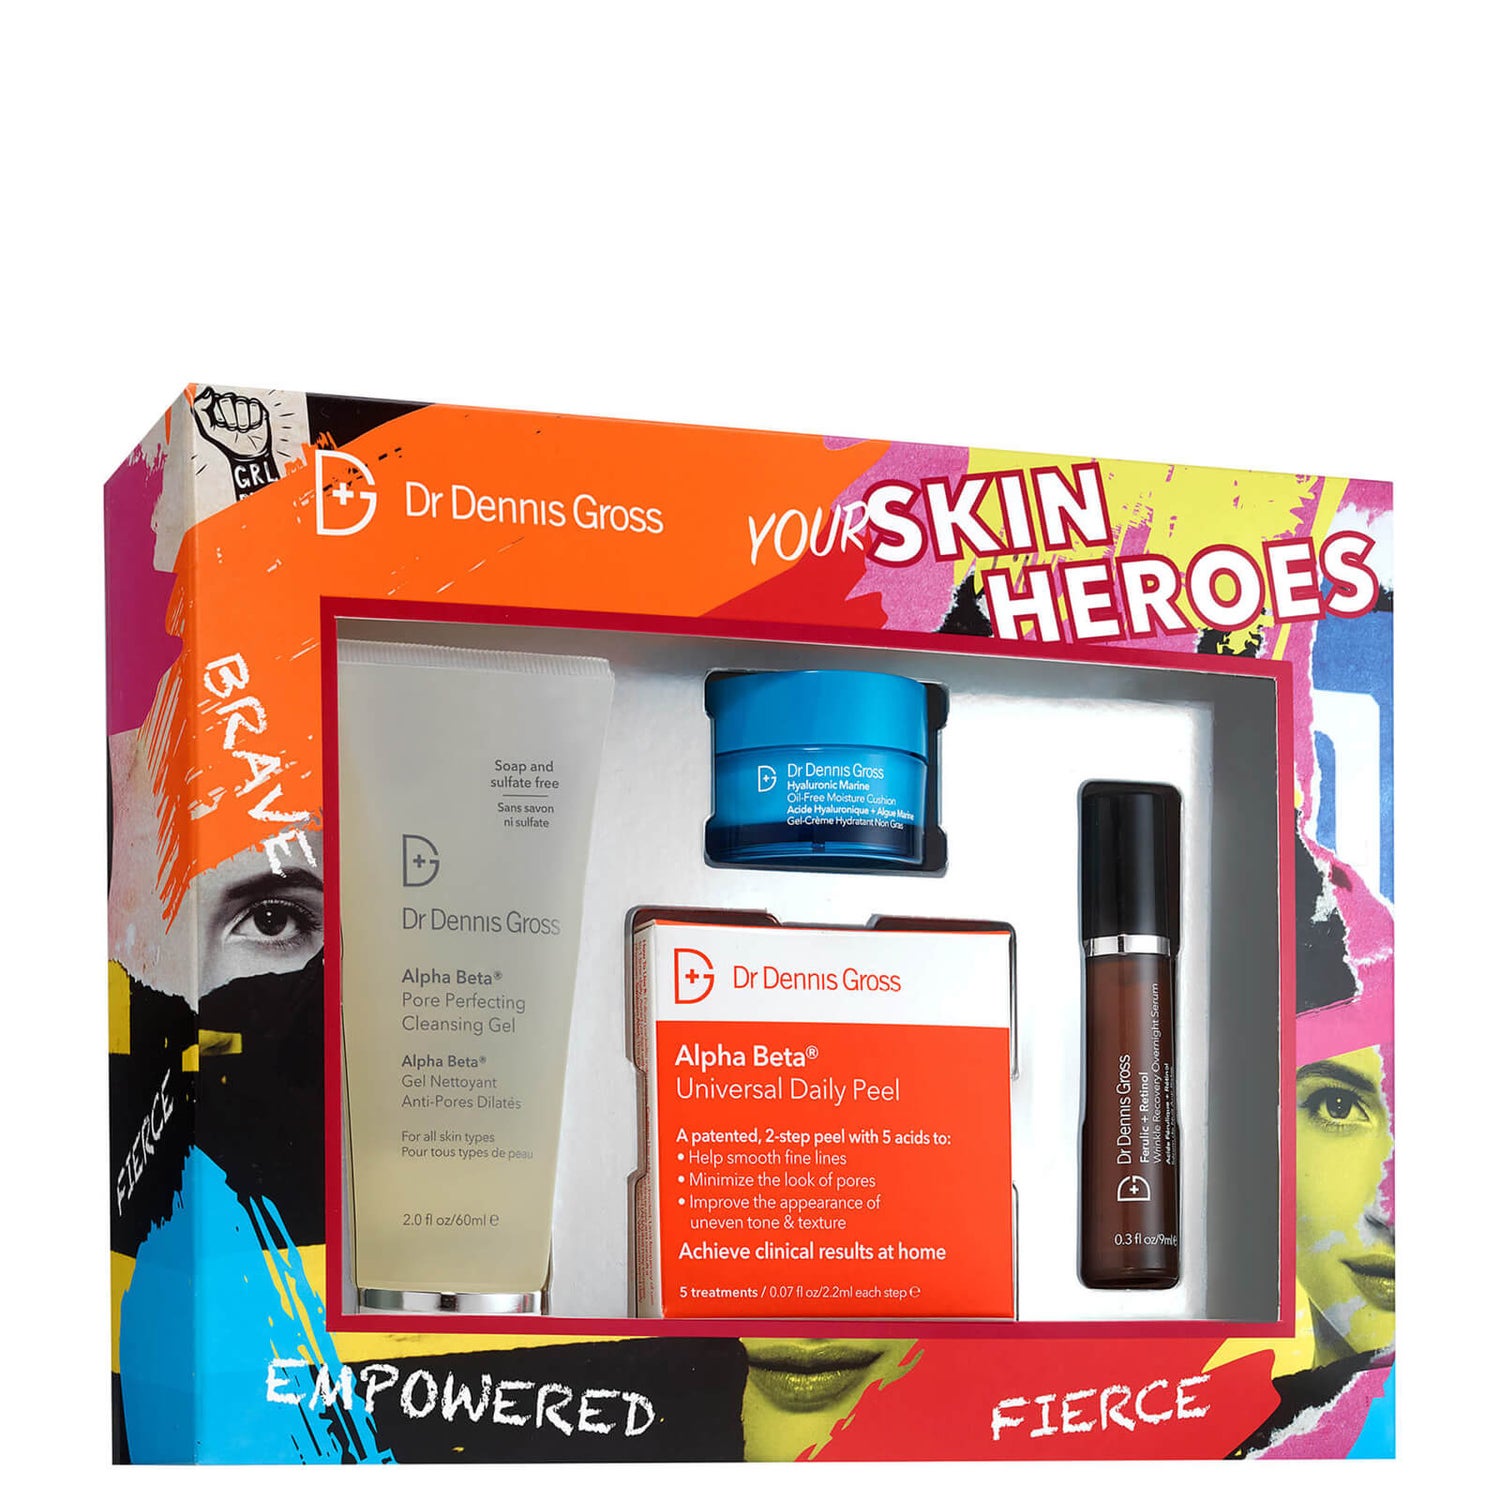 Dr Dennis Gross Skincare Your Skin Heroes (worth £79.10)